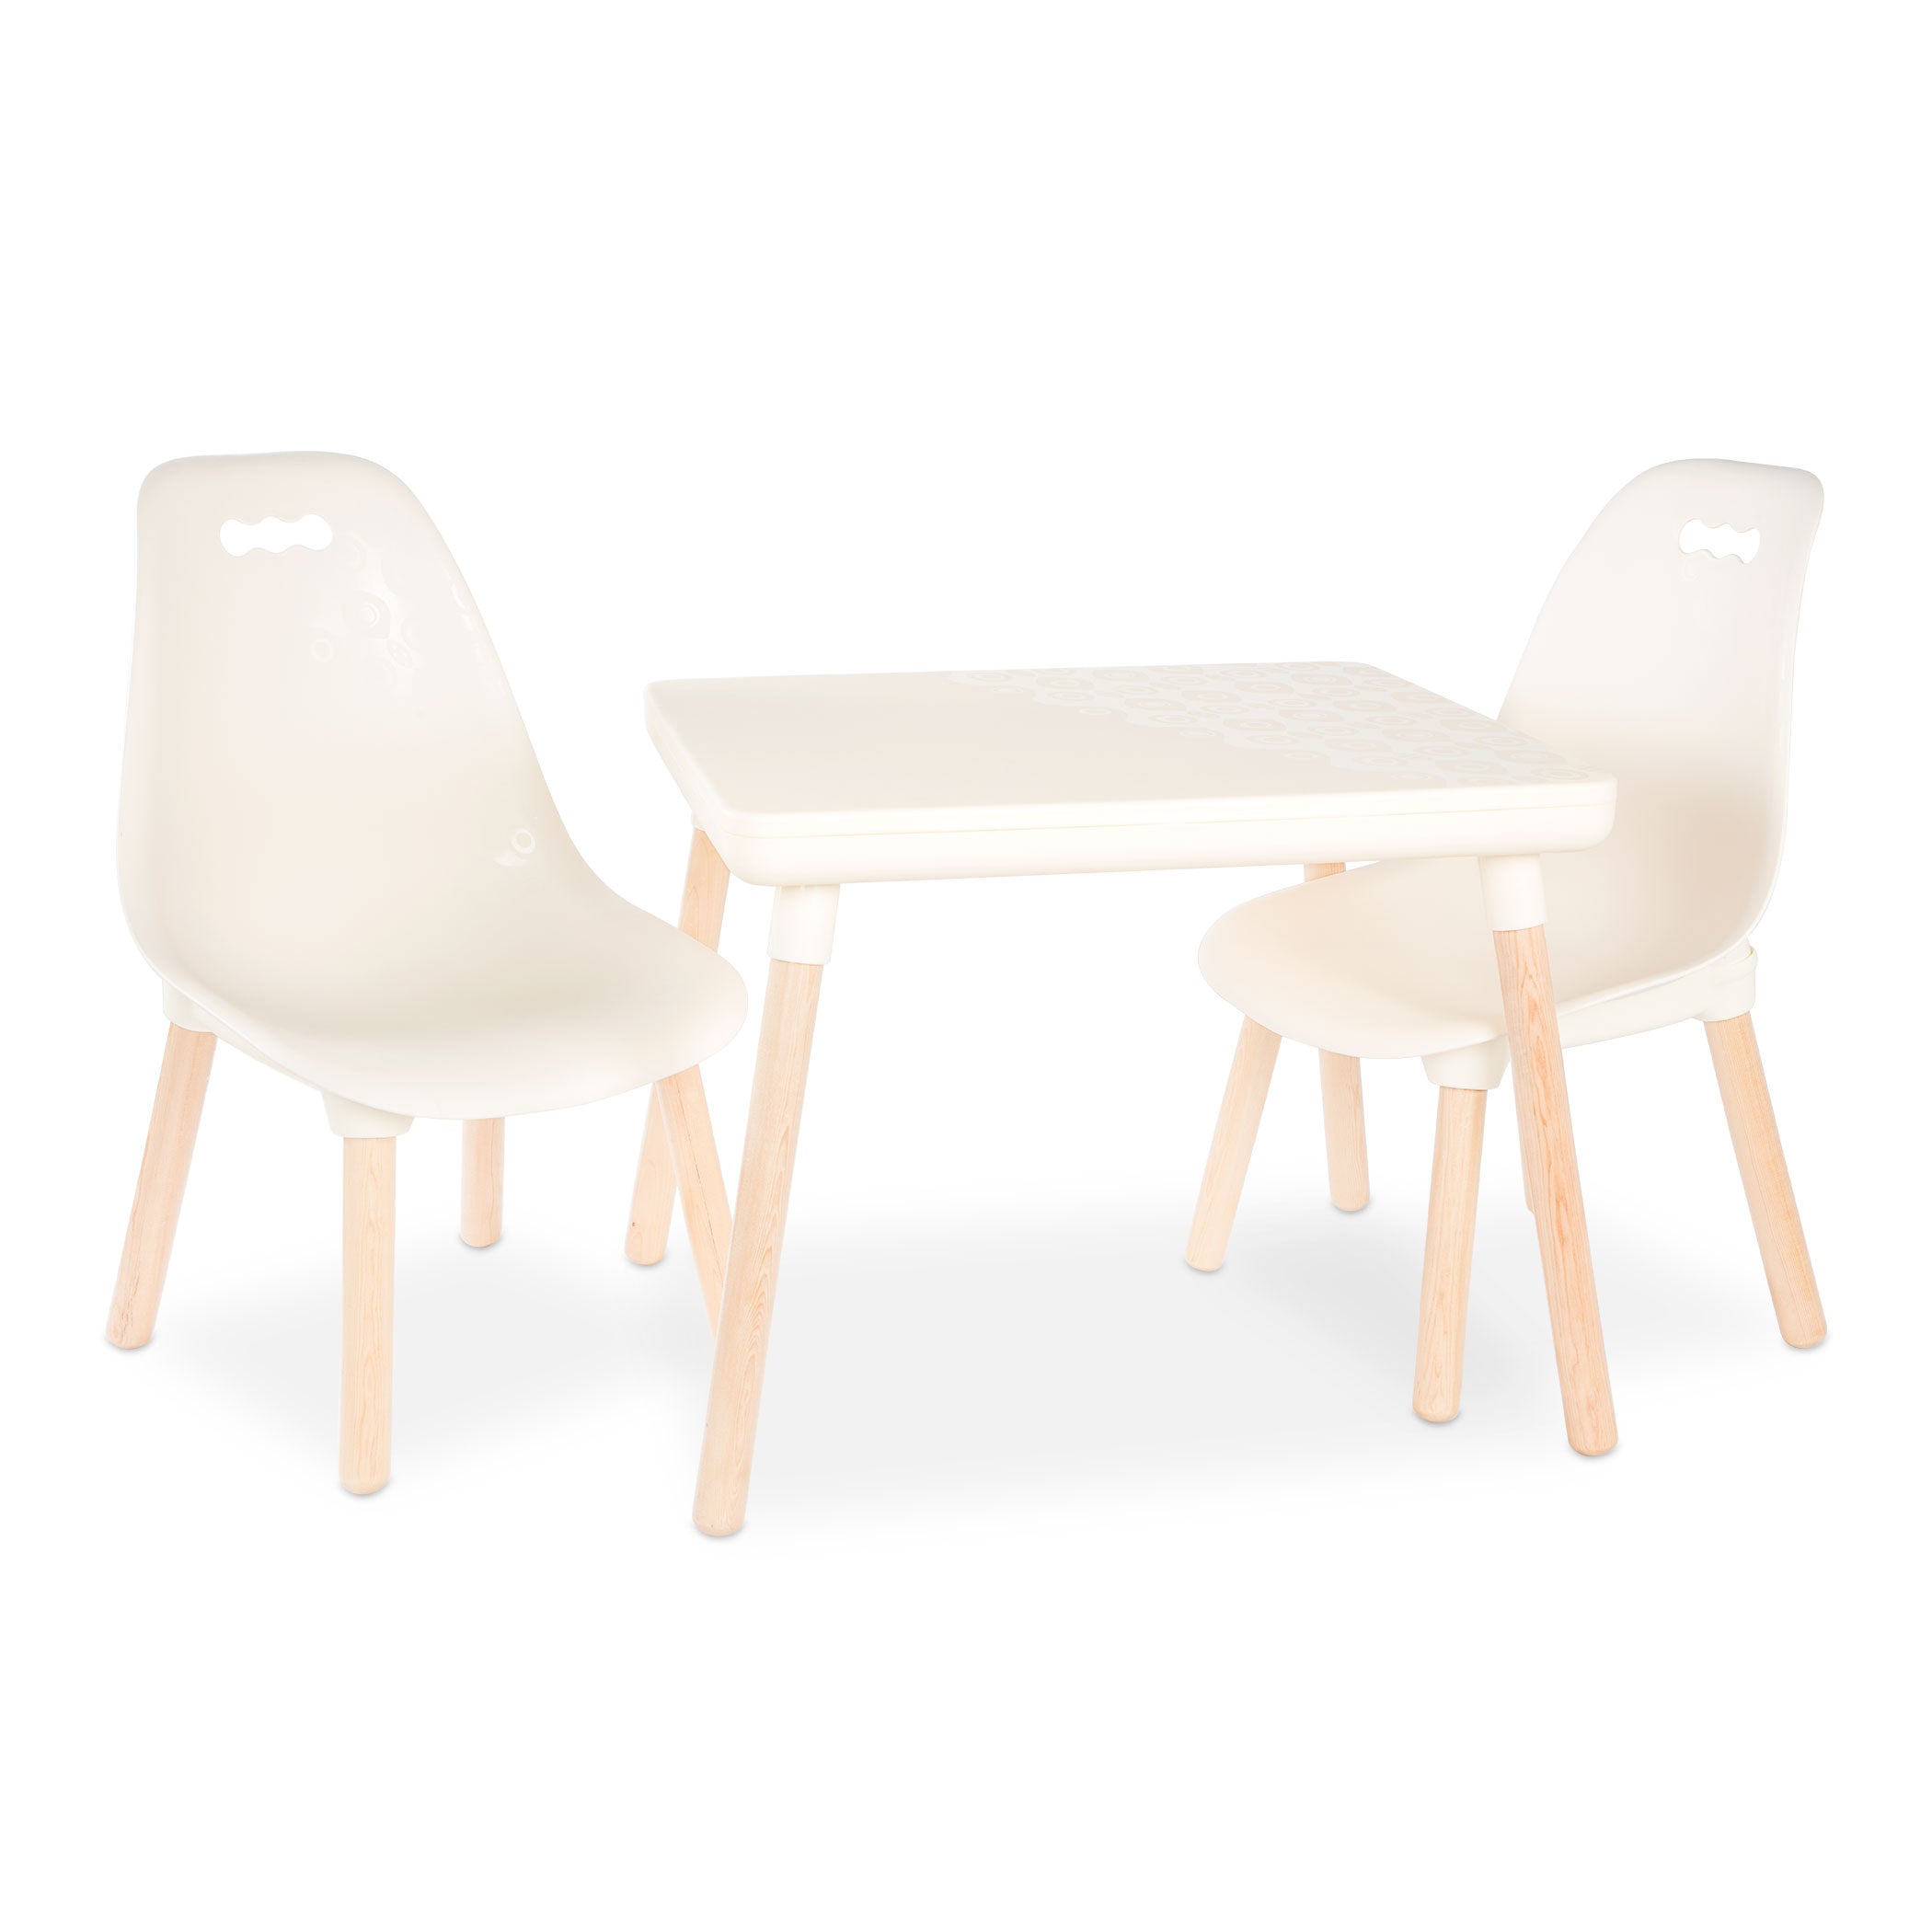 Ivory table and chair set